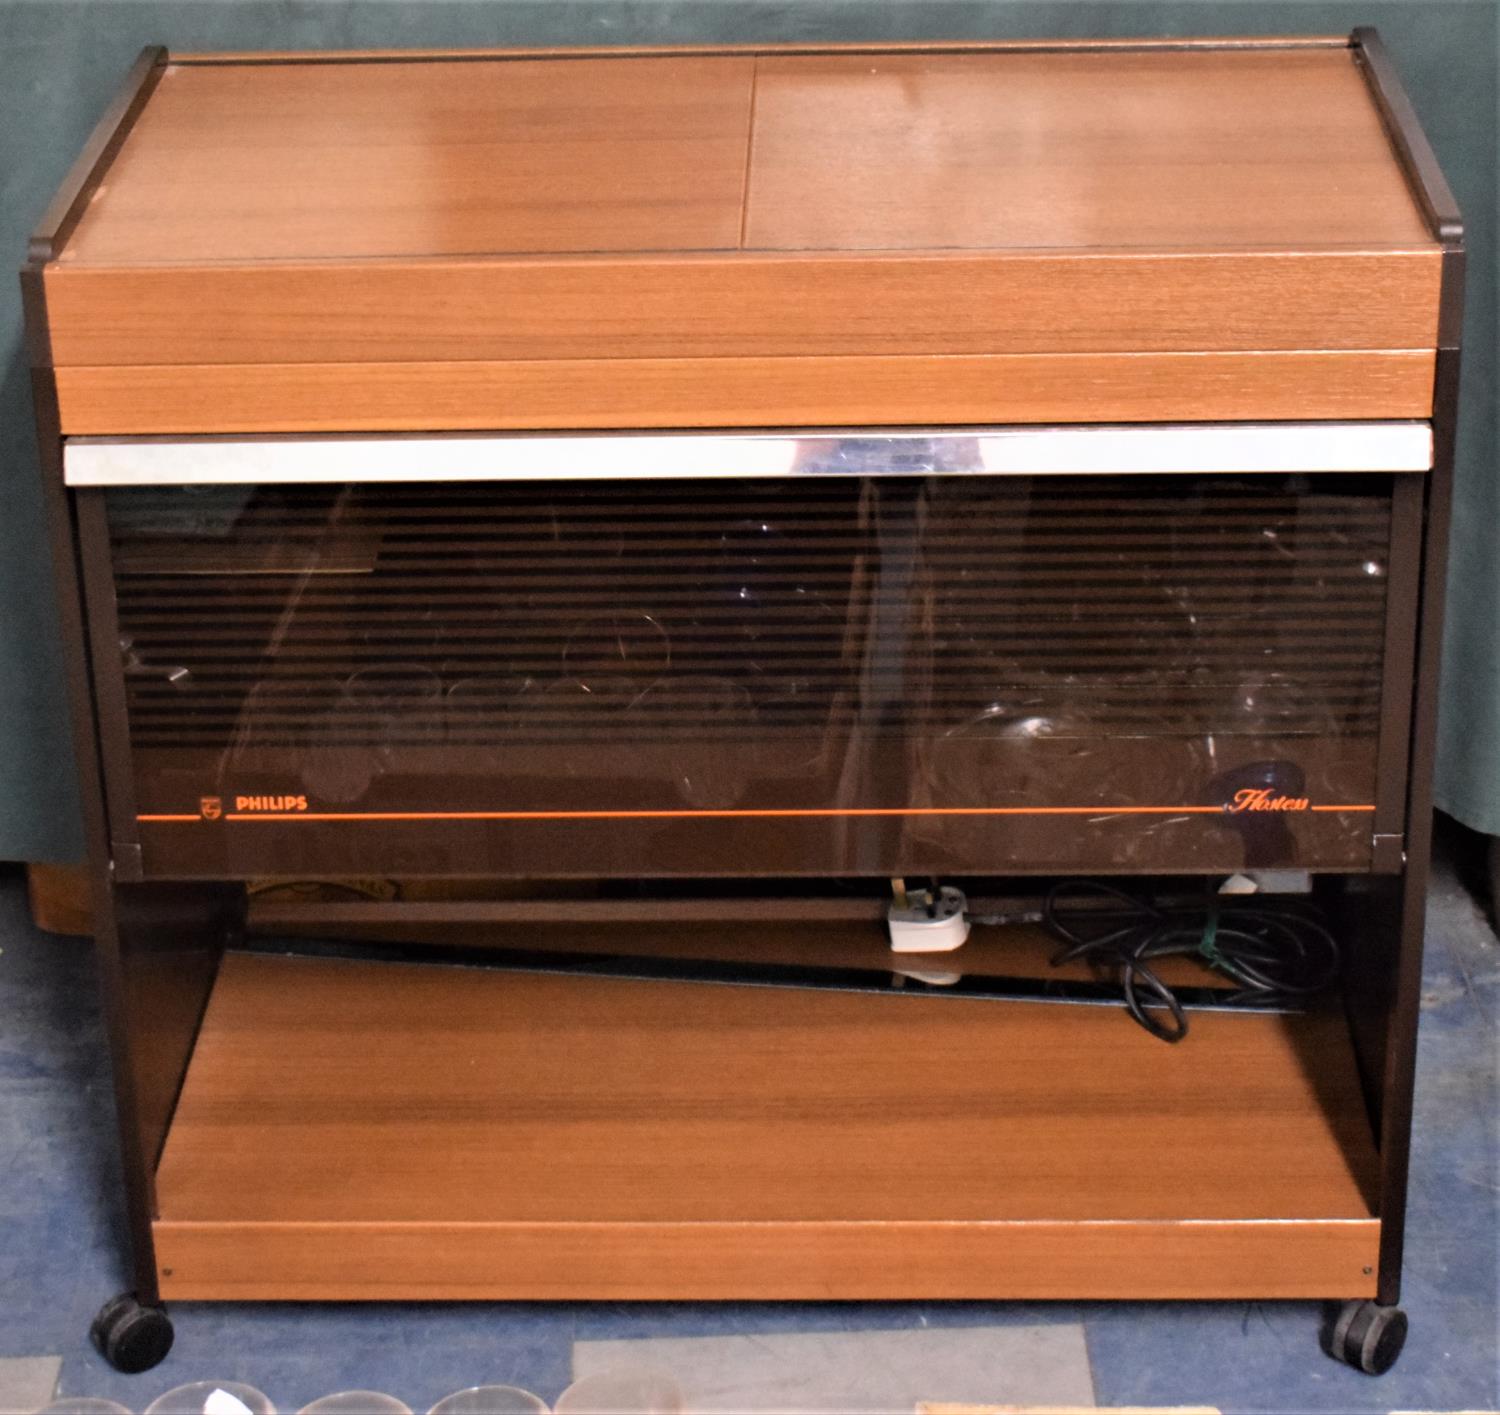 A Philips Hostess Trolley - Image 2 of 2